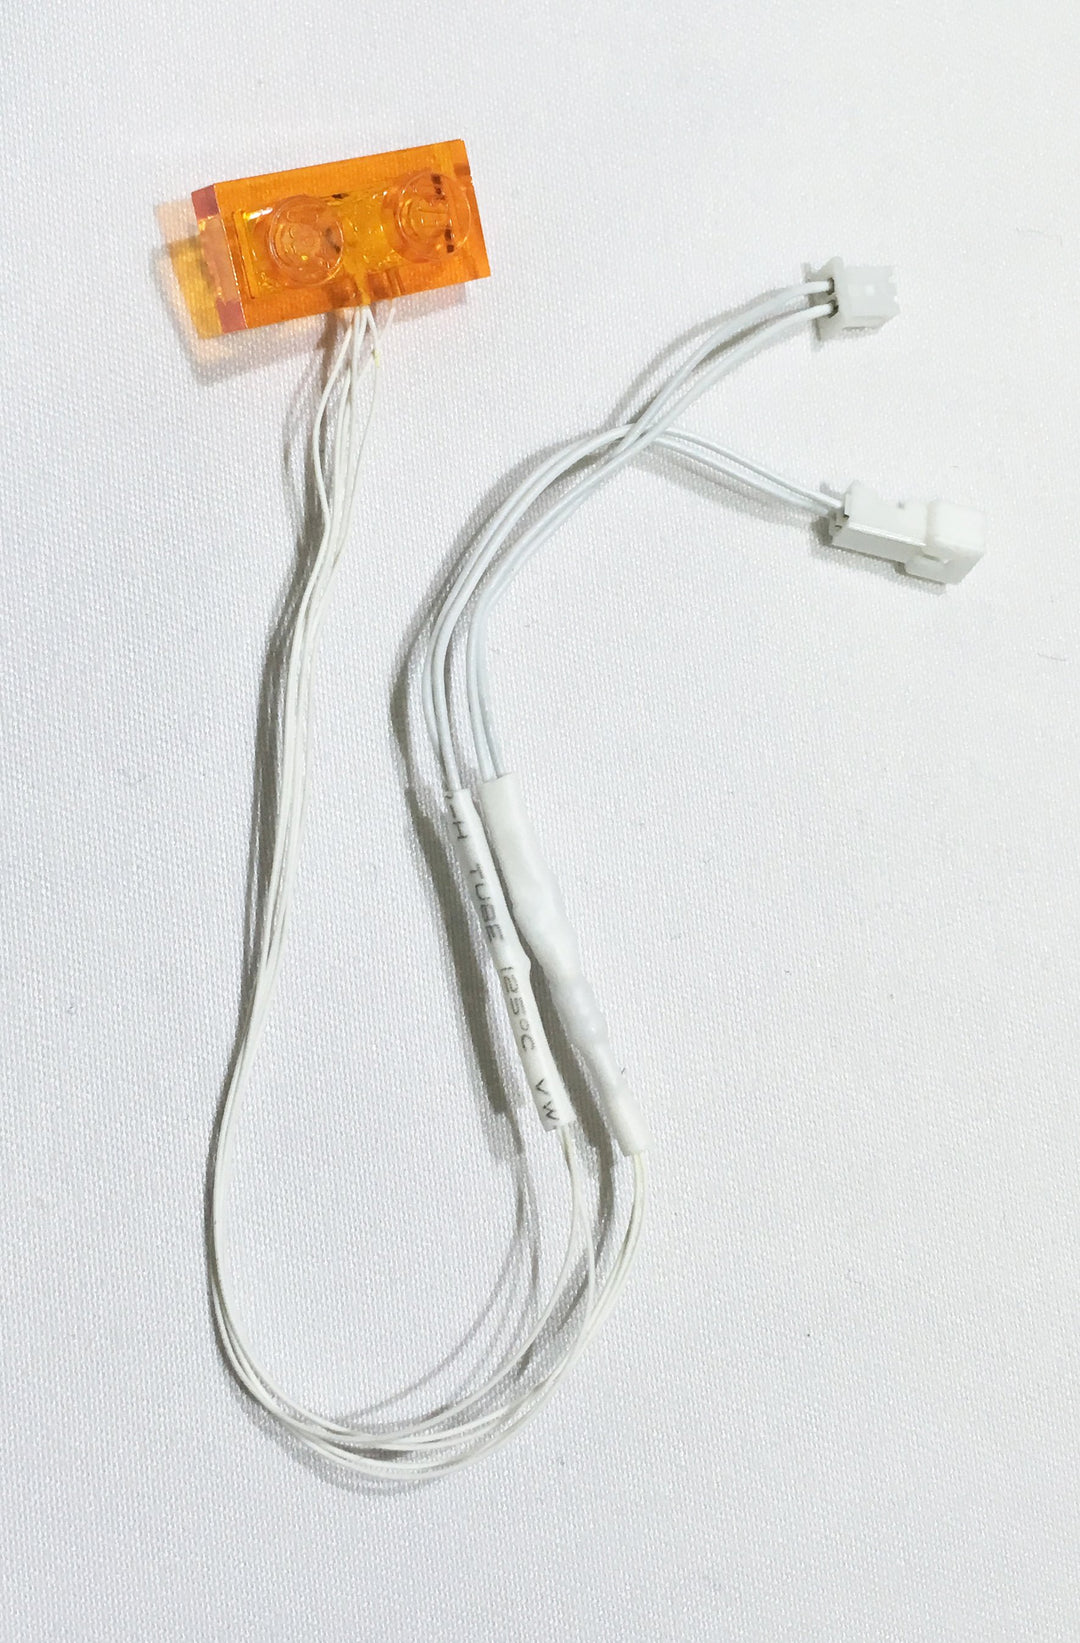 1x2-Orange-Translucent-Plate-LED-LIGHT-LINX-Create-Your-Own-LED-String-works-with-LEGO-bricks-by-Brick-Loot